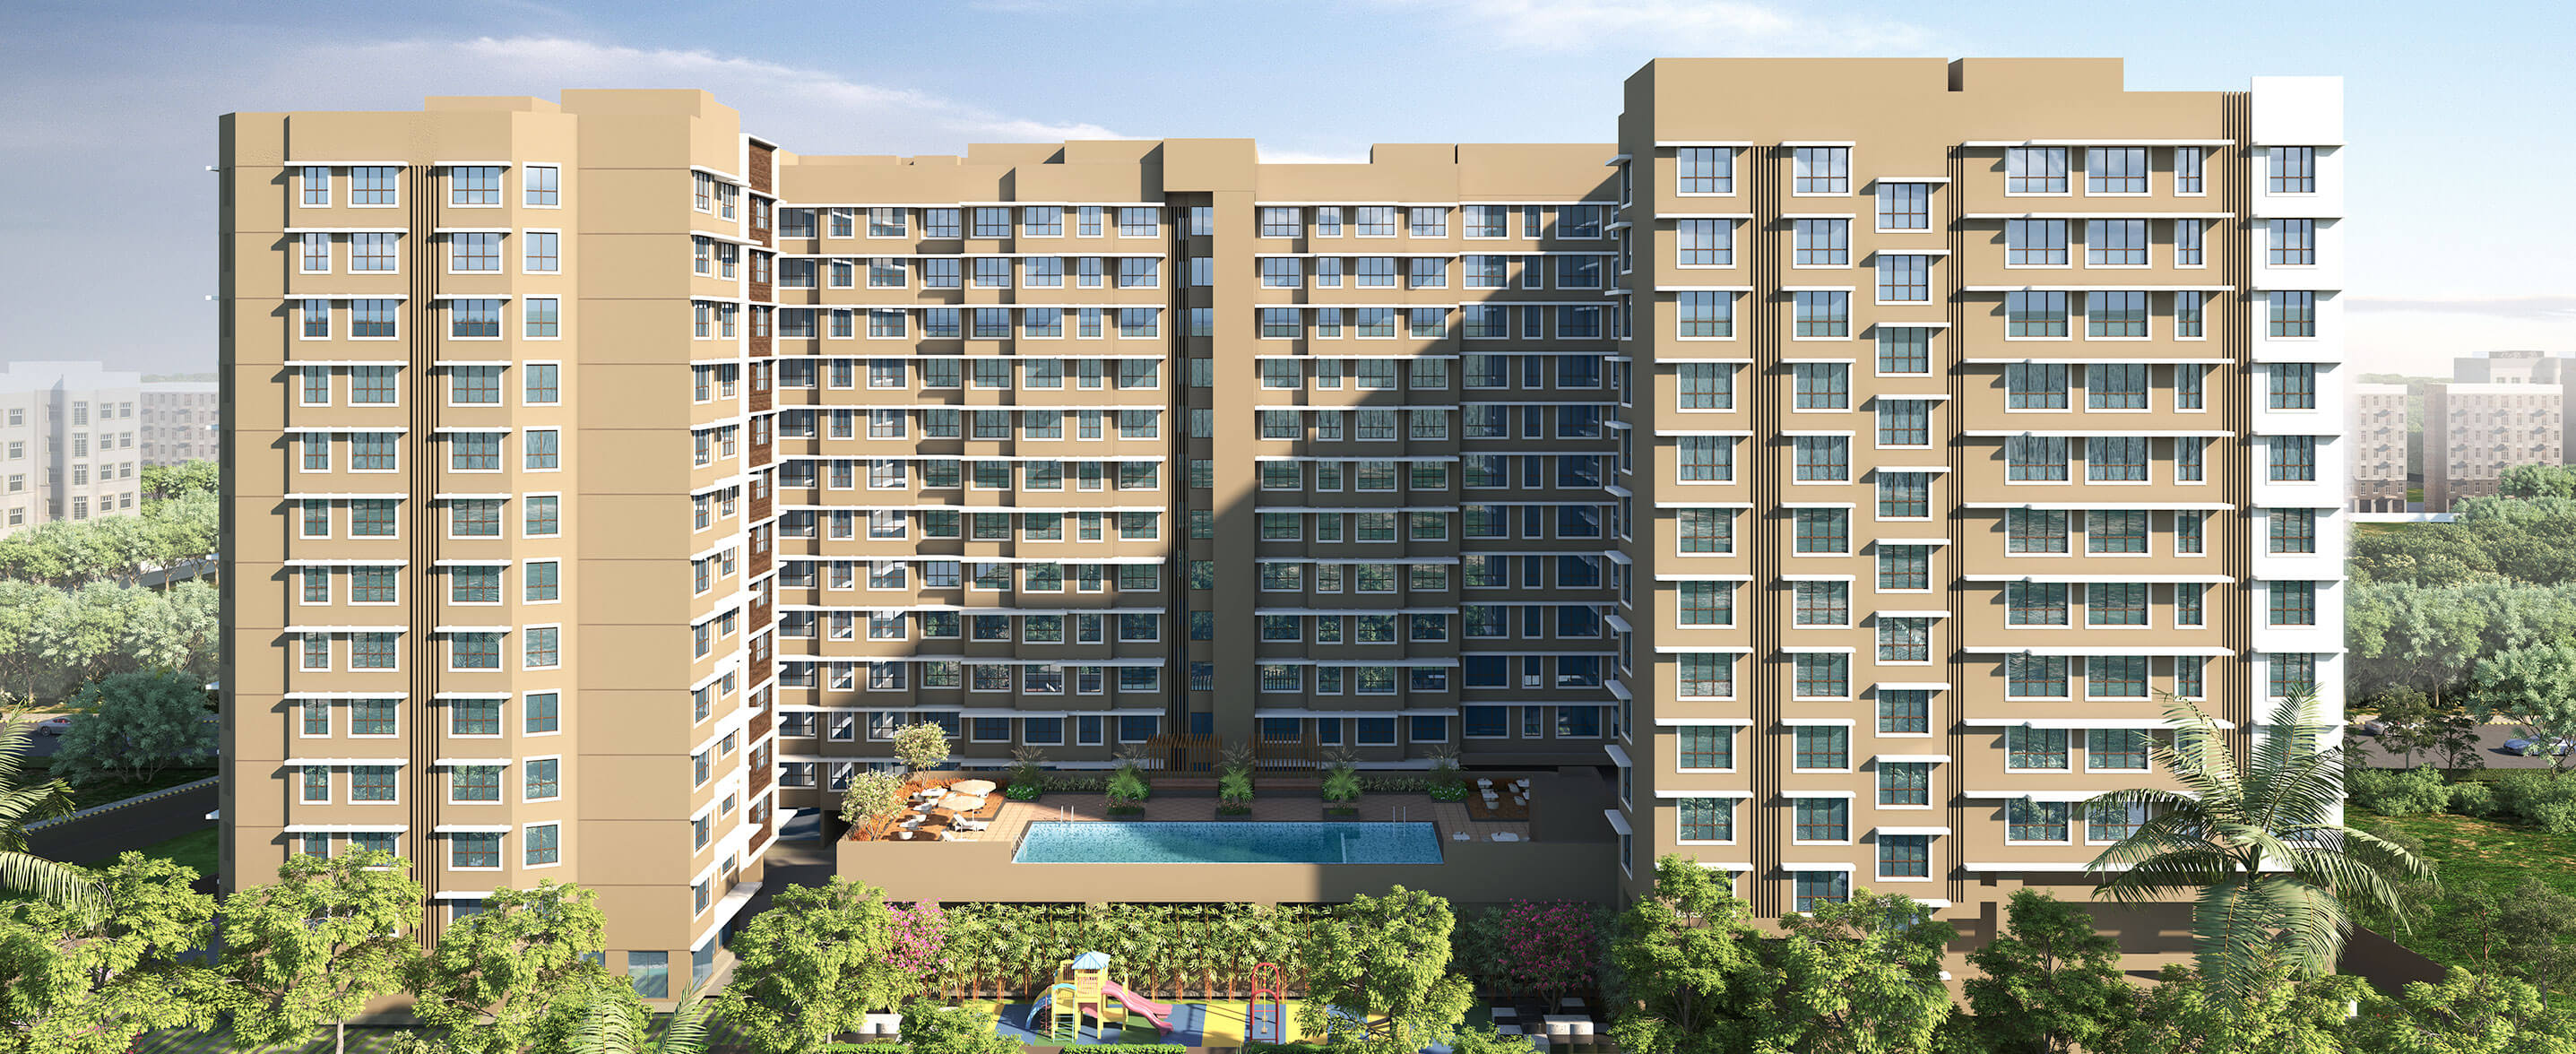 3 bhk flat and apartments for sale in sakinaka, andheri east